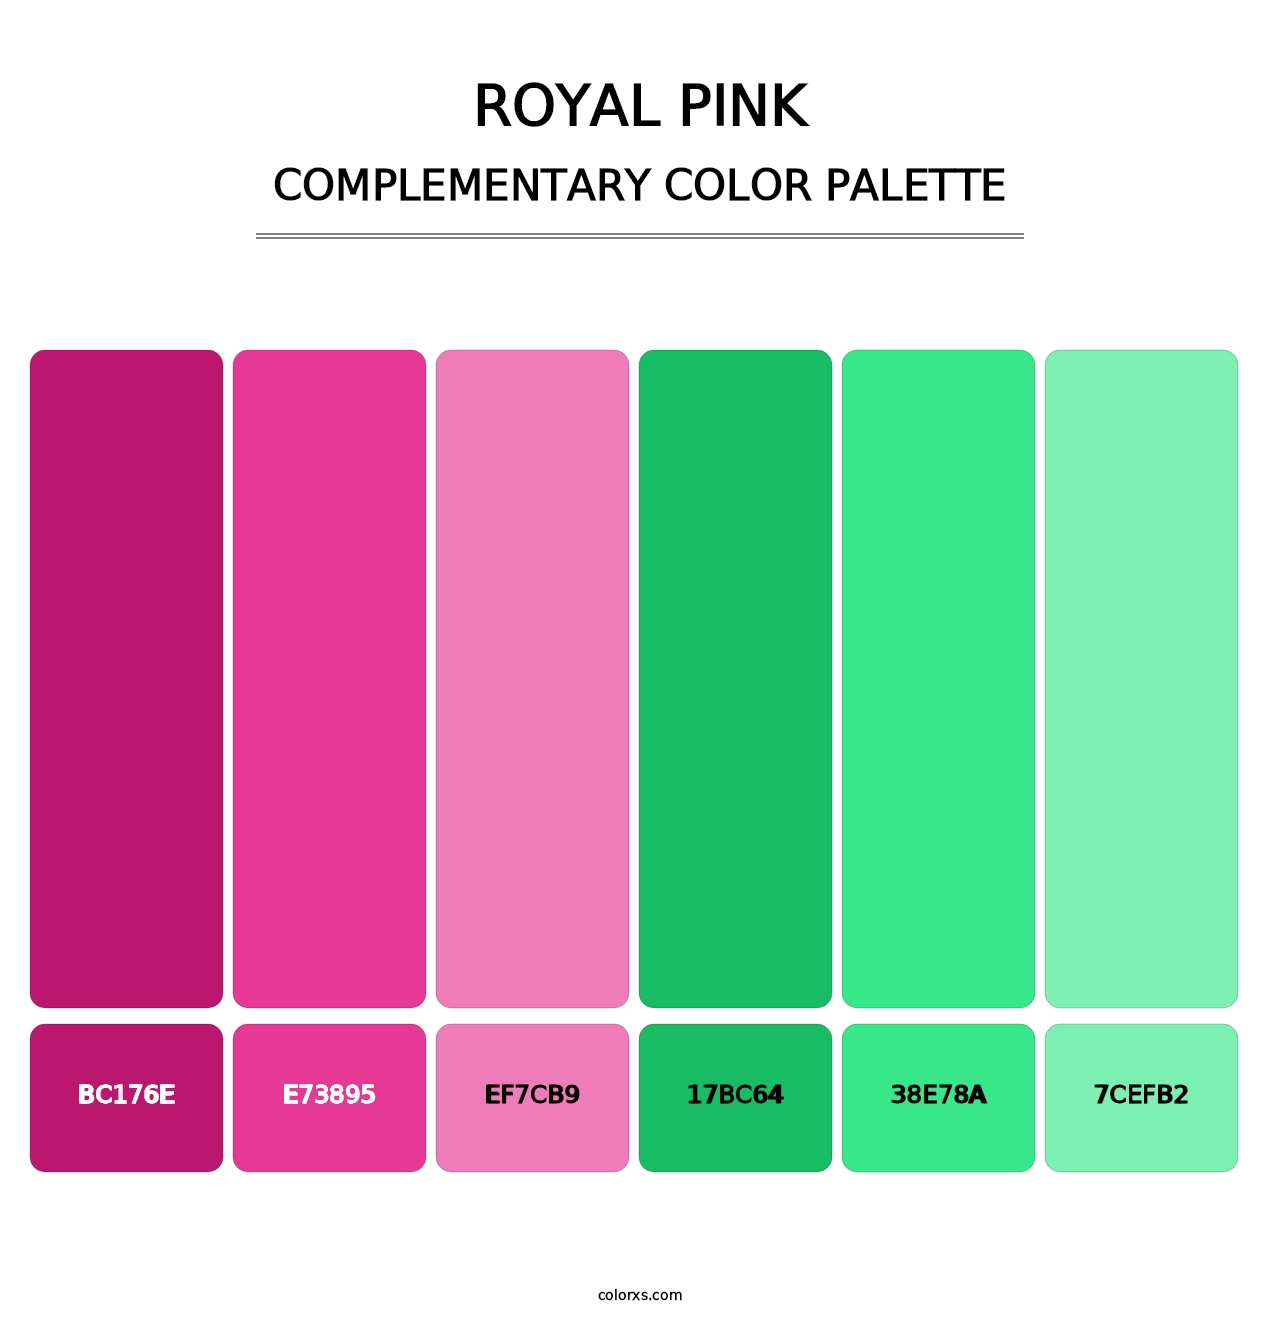 Royal Pink - Complementary Color Palette